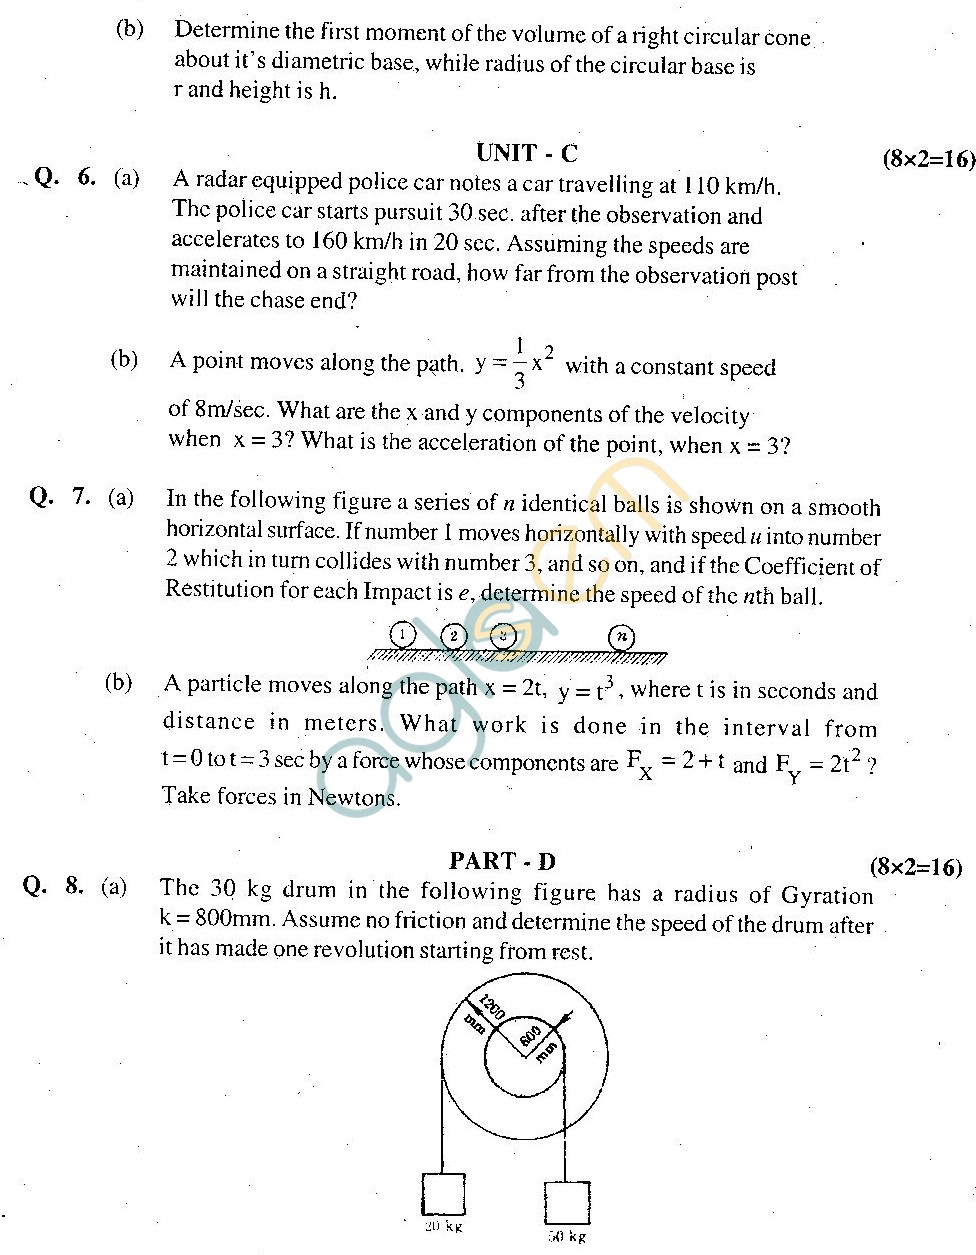 GGSIPU Question Papers Second Semester – end Term 2011 – ETME -110